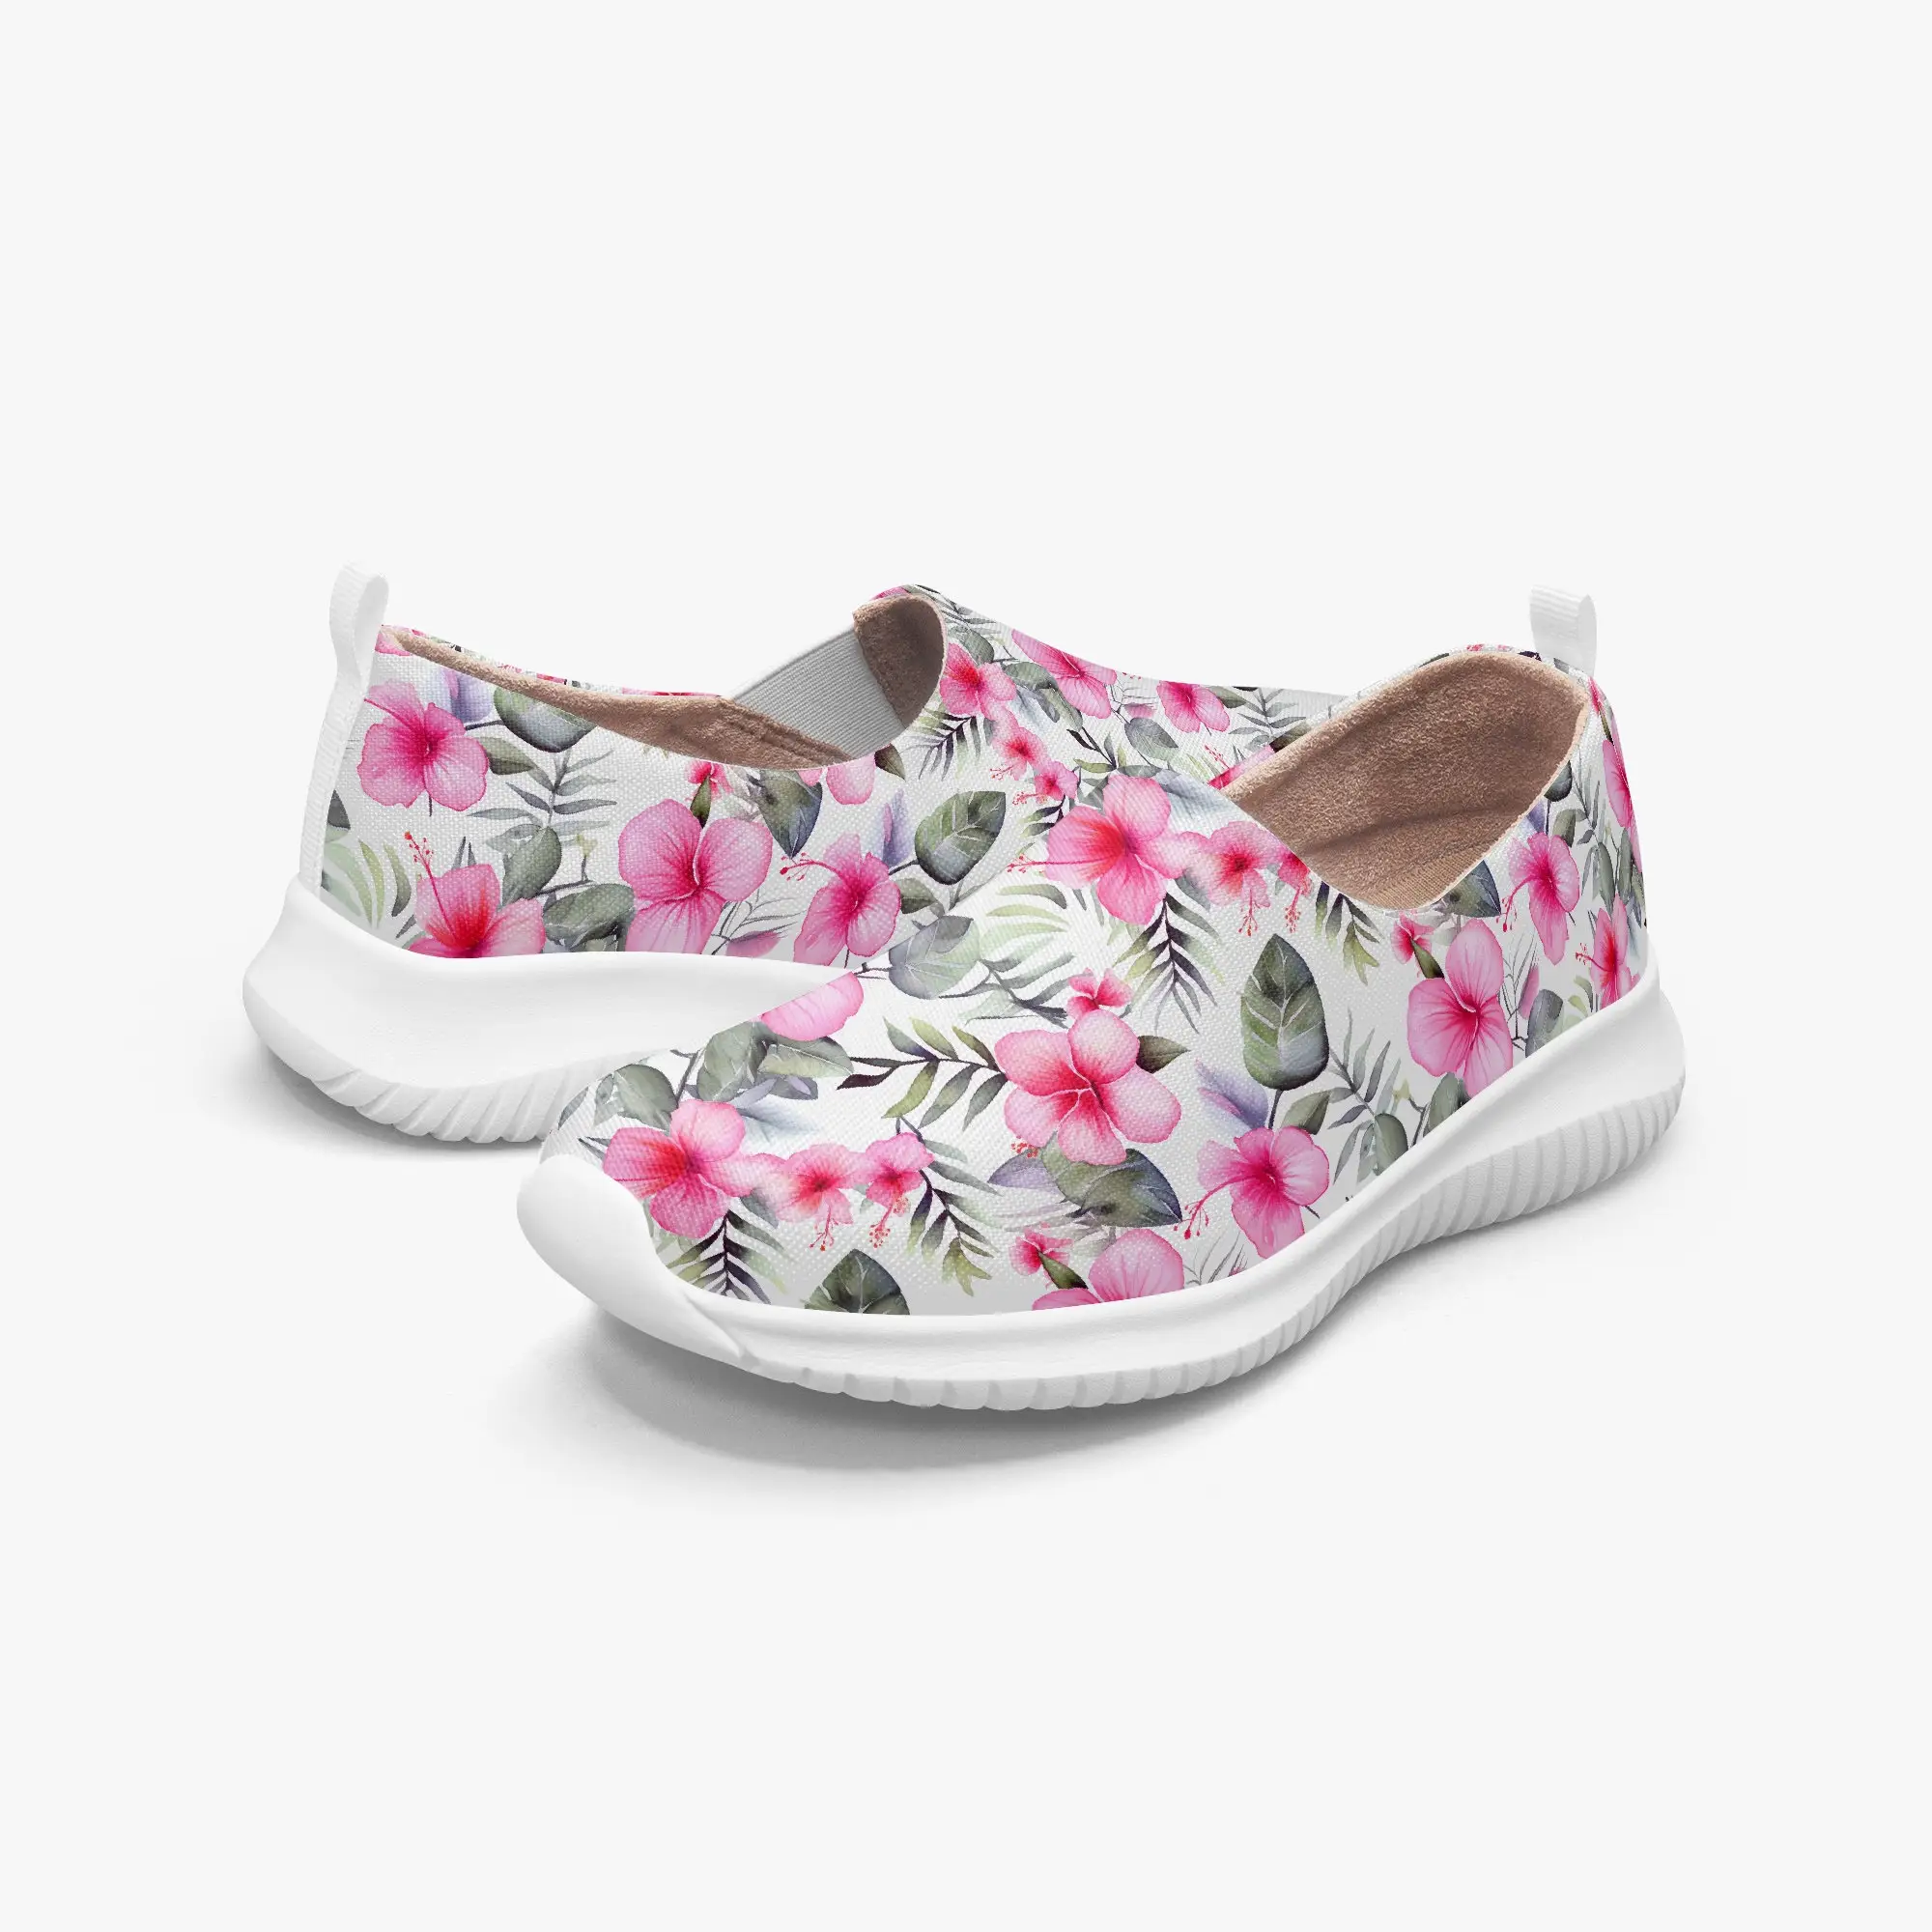 Drop Shipping Hawaiian Hibiscus Flower Pattern Print Casual Flats for Ladies Outdoor Slip On Walking Shoes Soft Comfort Loafers